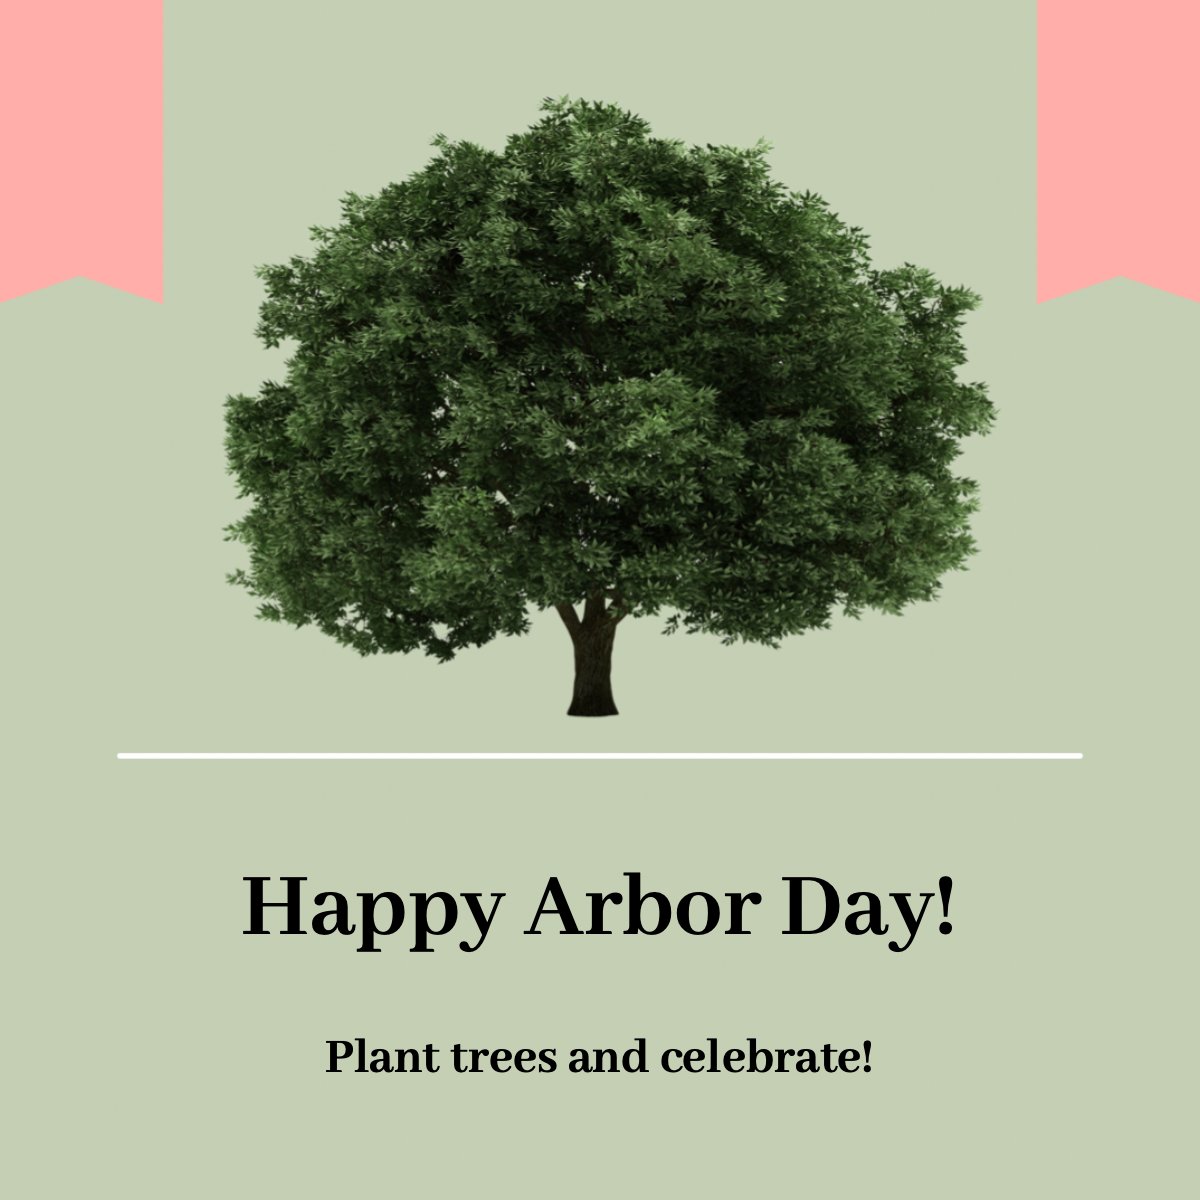 'There's nothing wrong with having a tree as a friend.' – Bob Ross

Happy Arbor Day 🌲!

#arborday #trees #dayforthetrees #blue #white #black #sunset
 #barbarabarker #barrettrealestate #barbarabarkerteam #realestate #scottsdale #chandler #queencreek #gilbert #homes